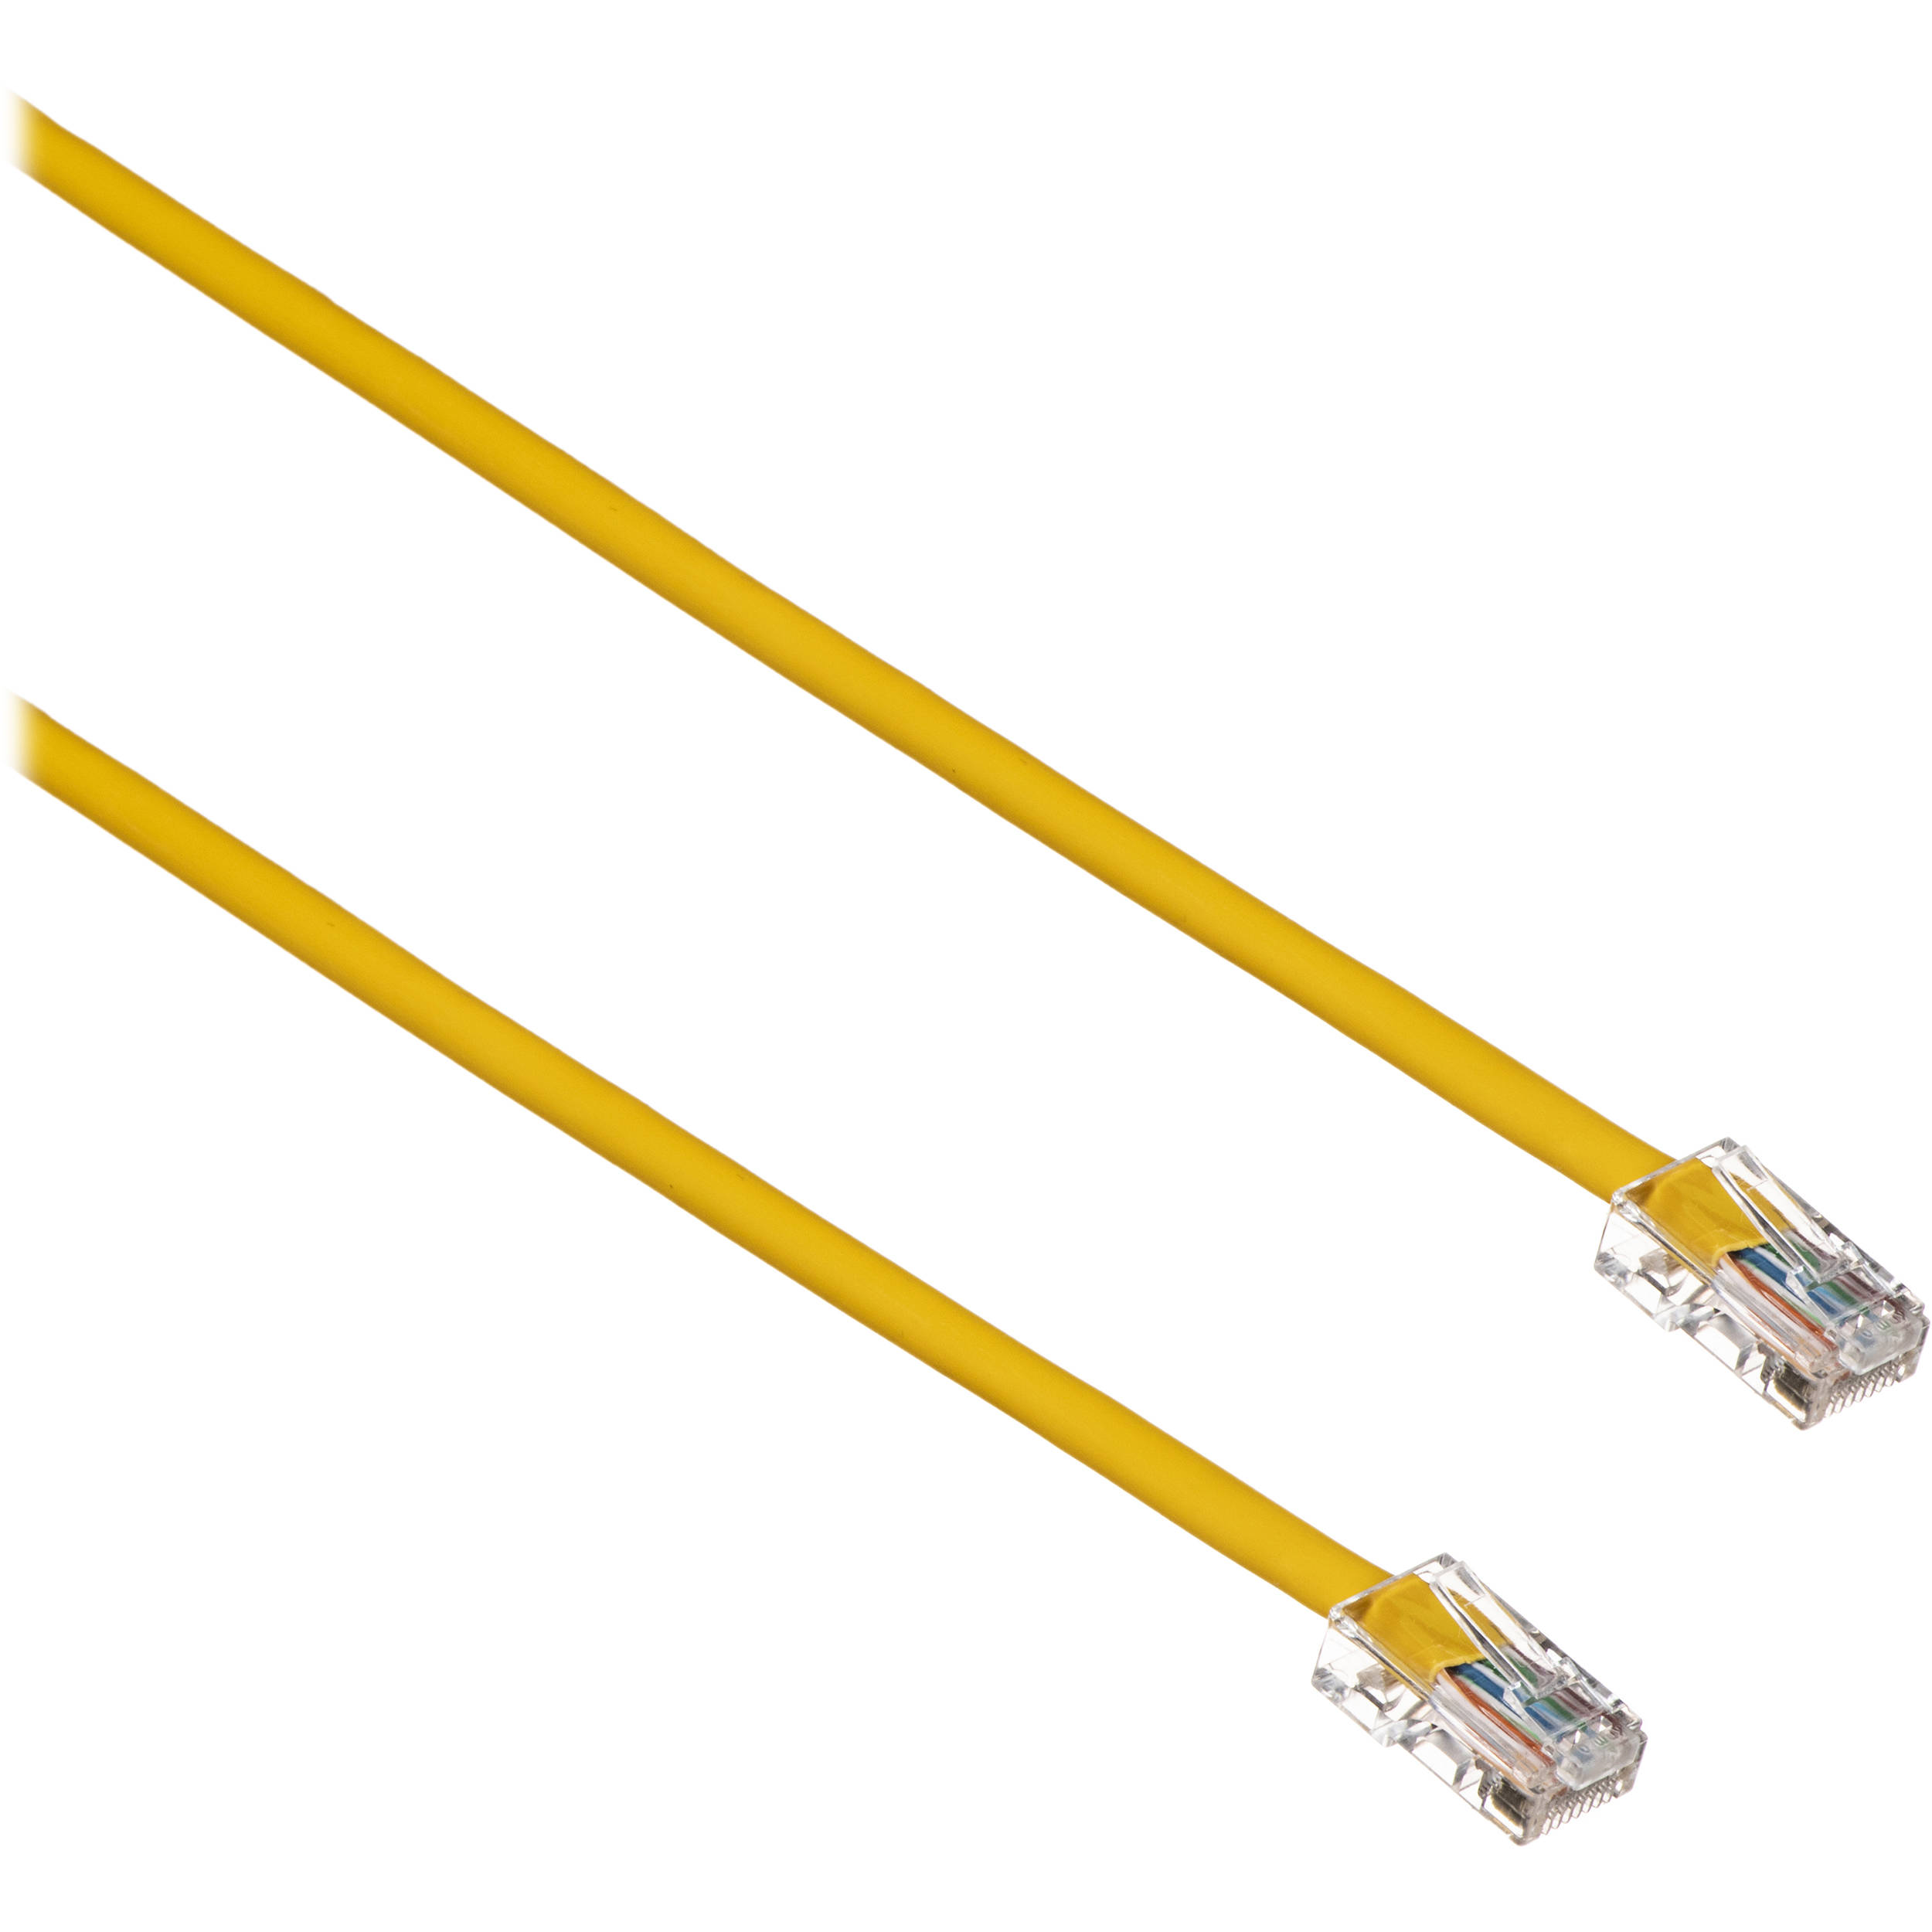 Comprehensive CAT5e 350 MHz Assembly Cable (1', Yellow)